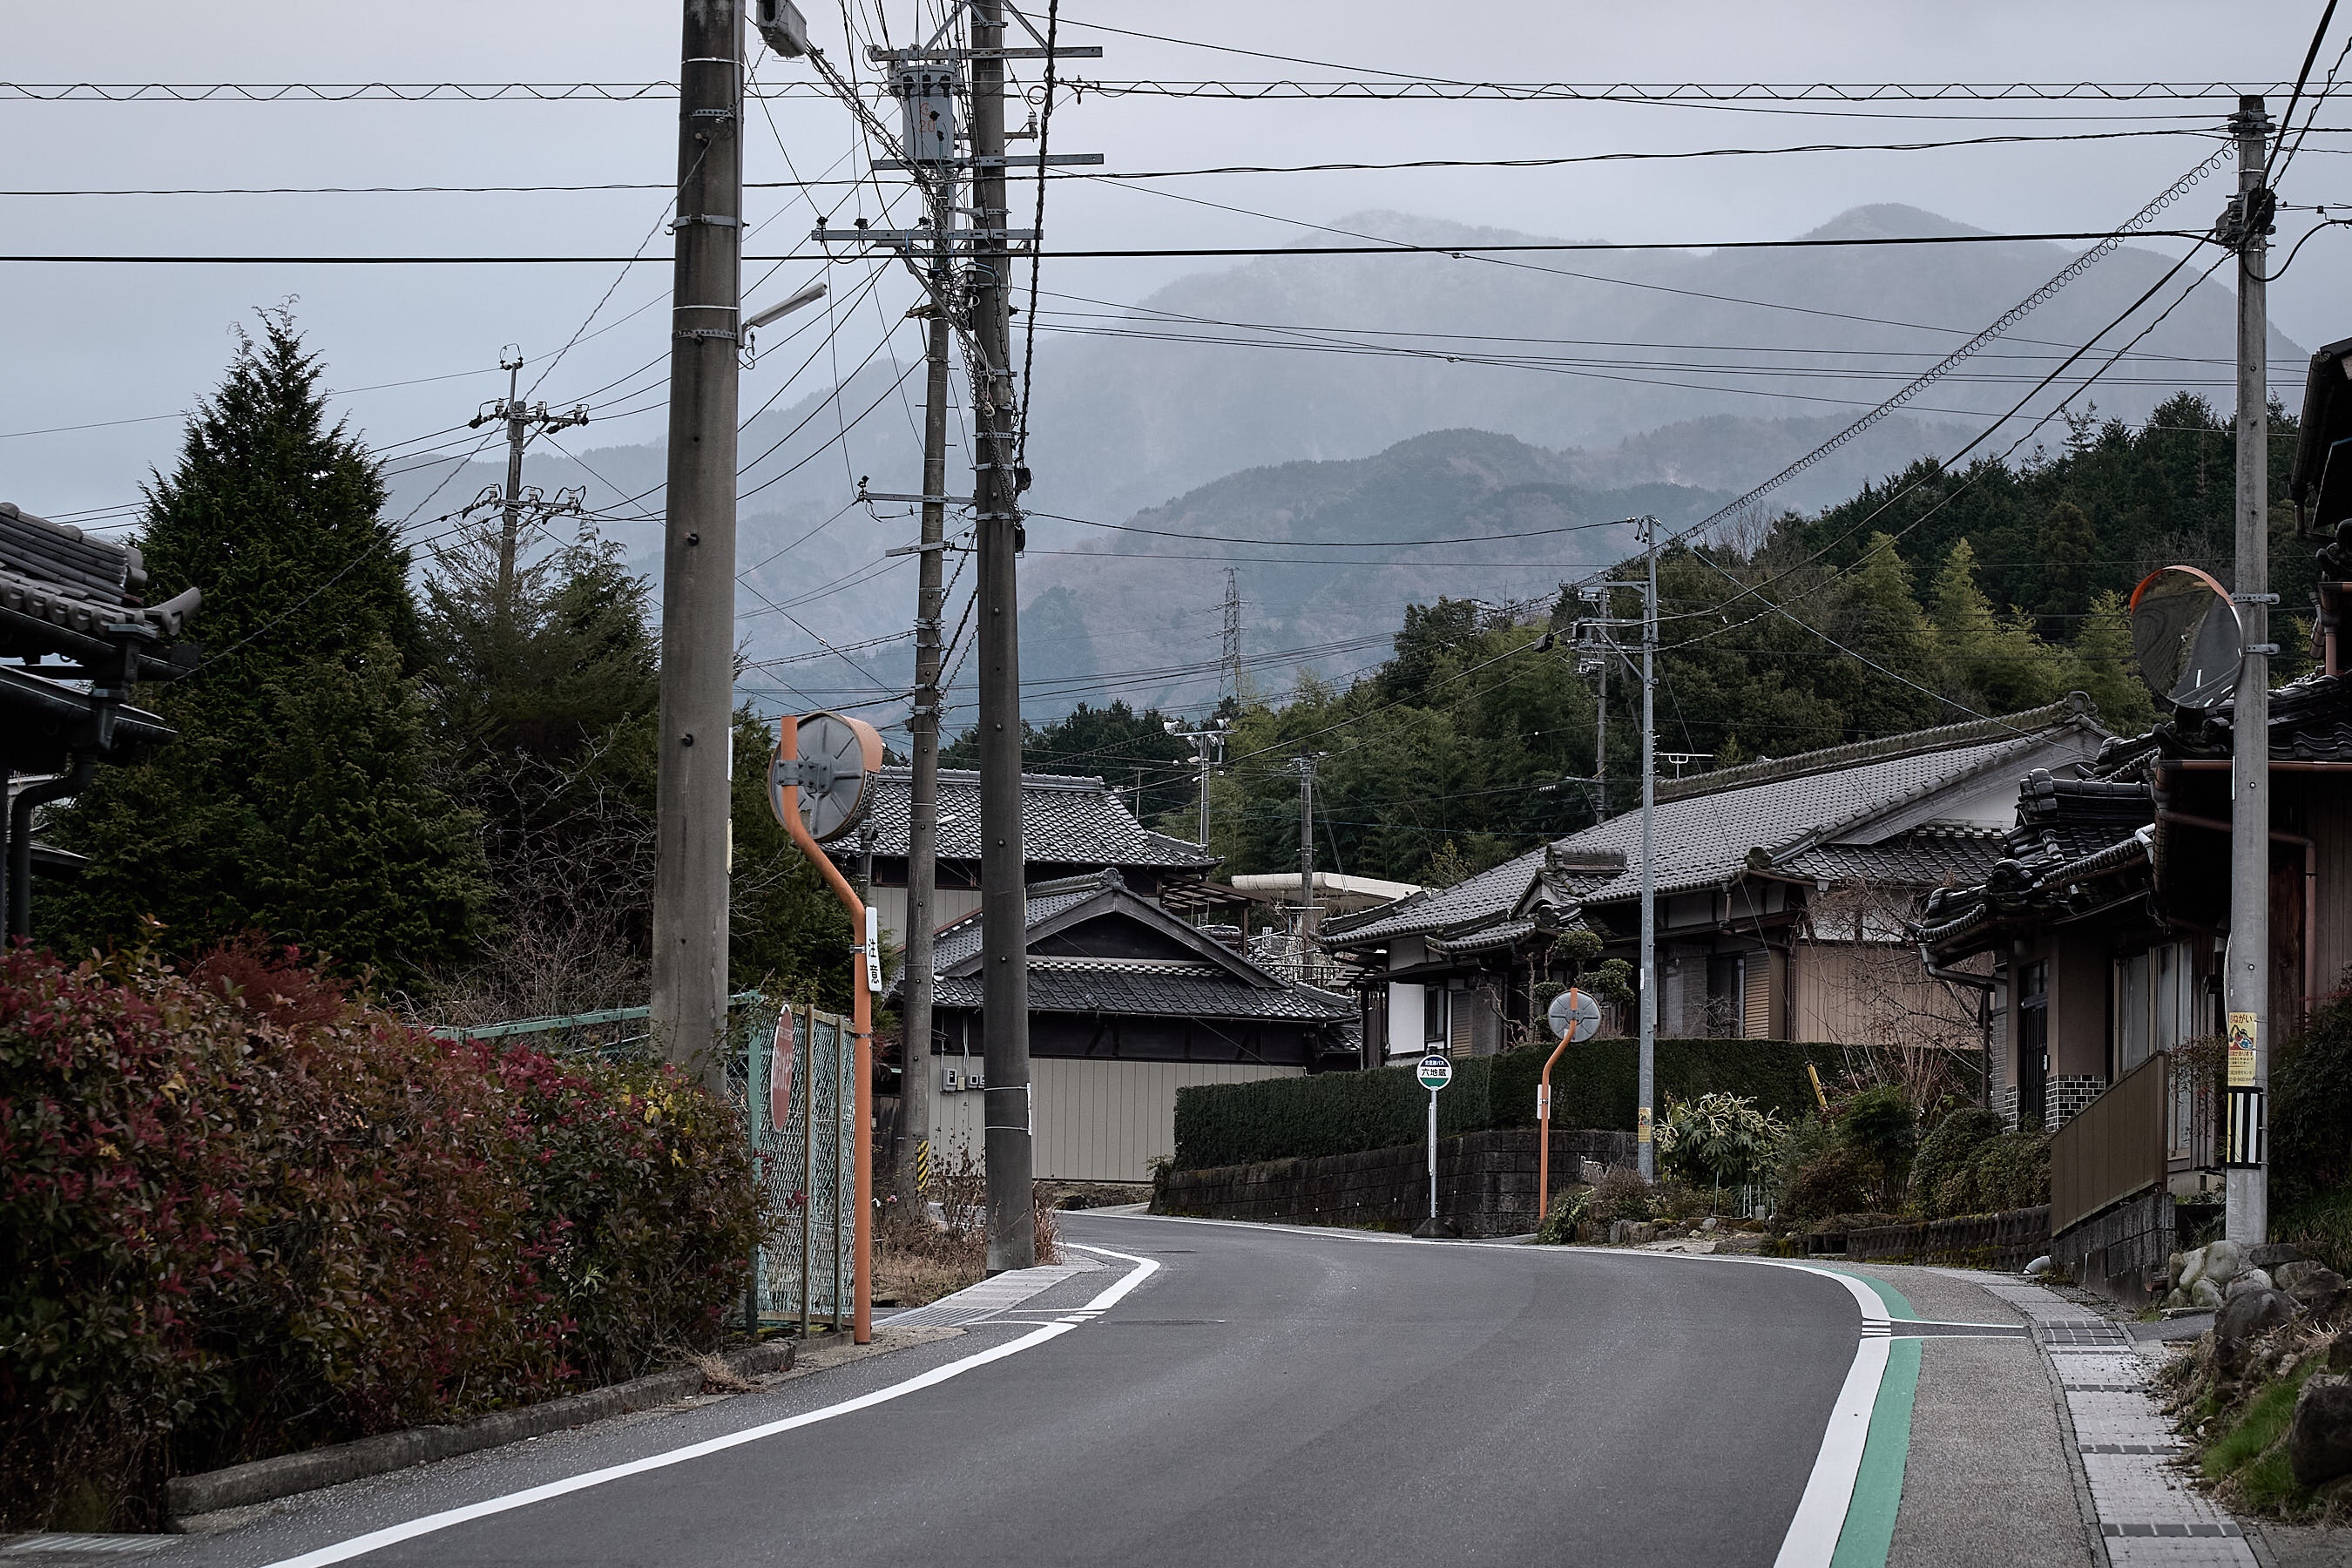 A hamlet on the Nakasendō. Mountains in the distance.